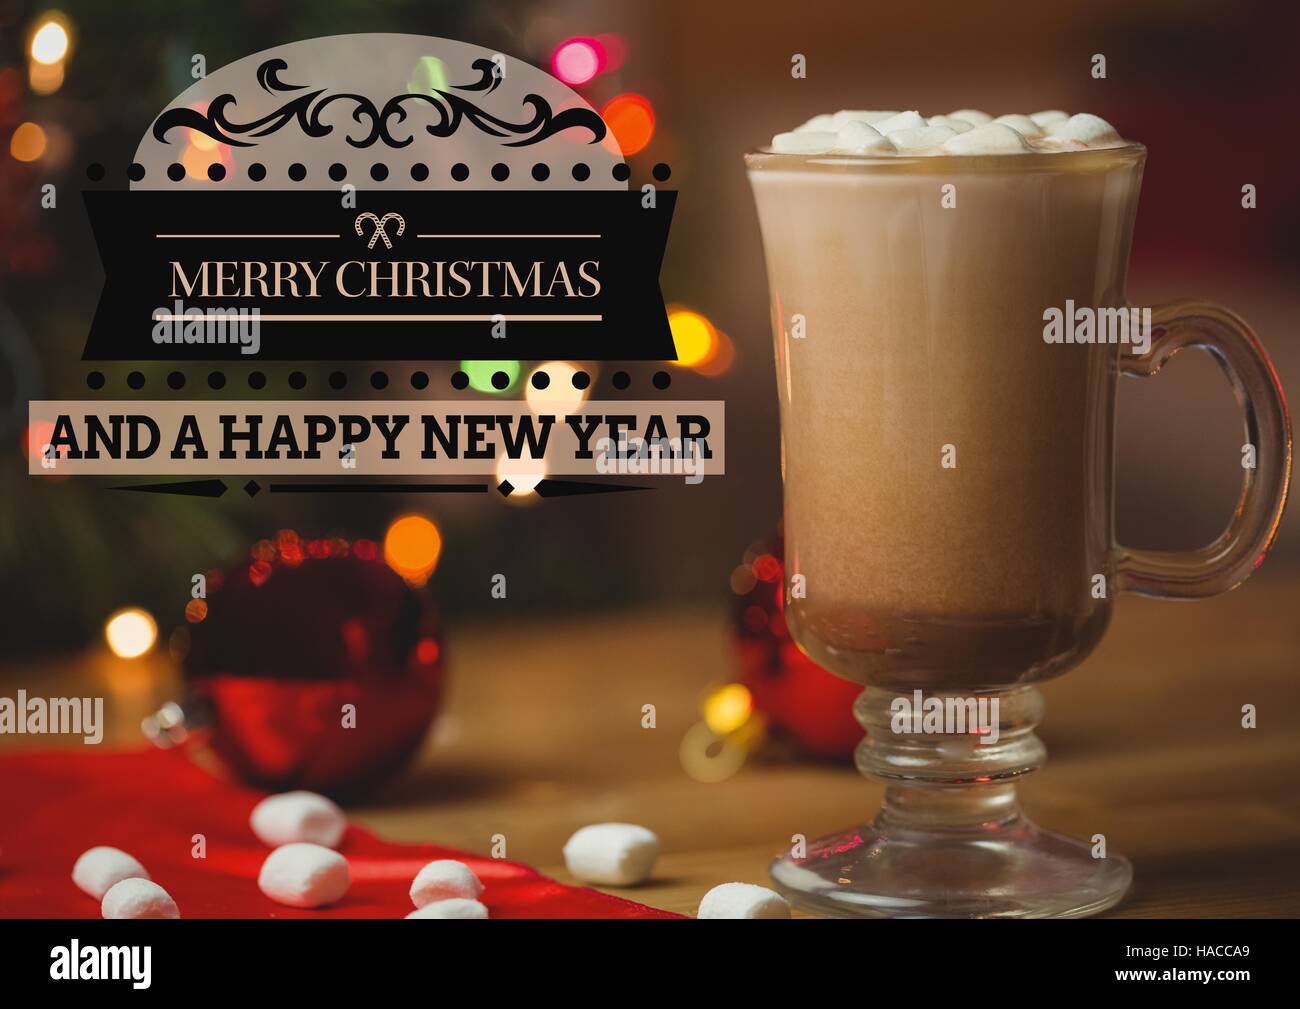 Merry Christmas greetings with coffee and marshmallow in glass Stock Photo